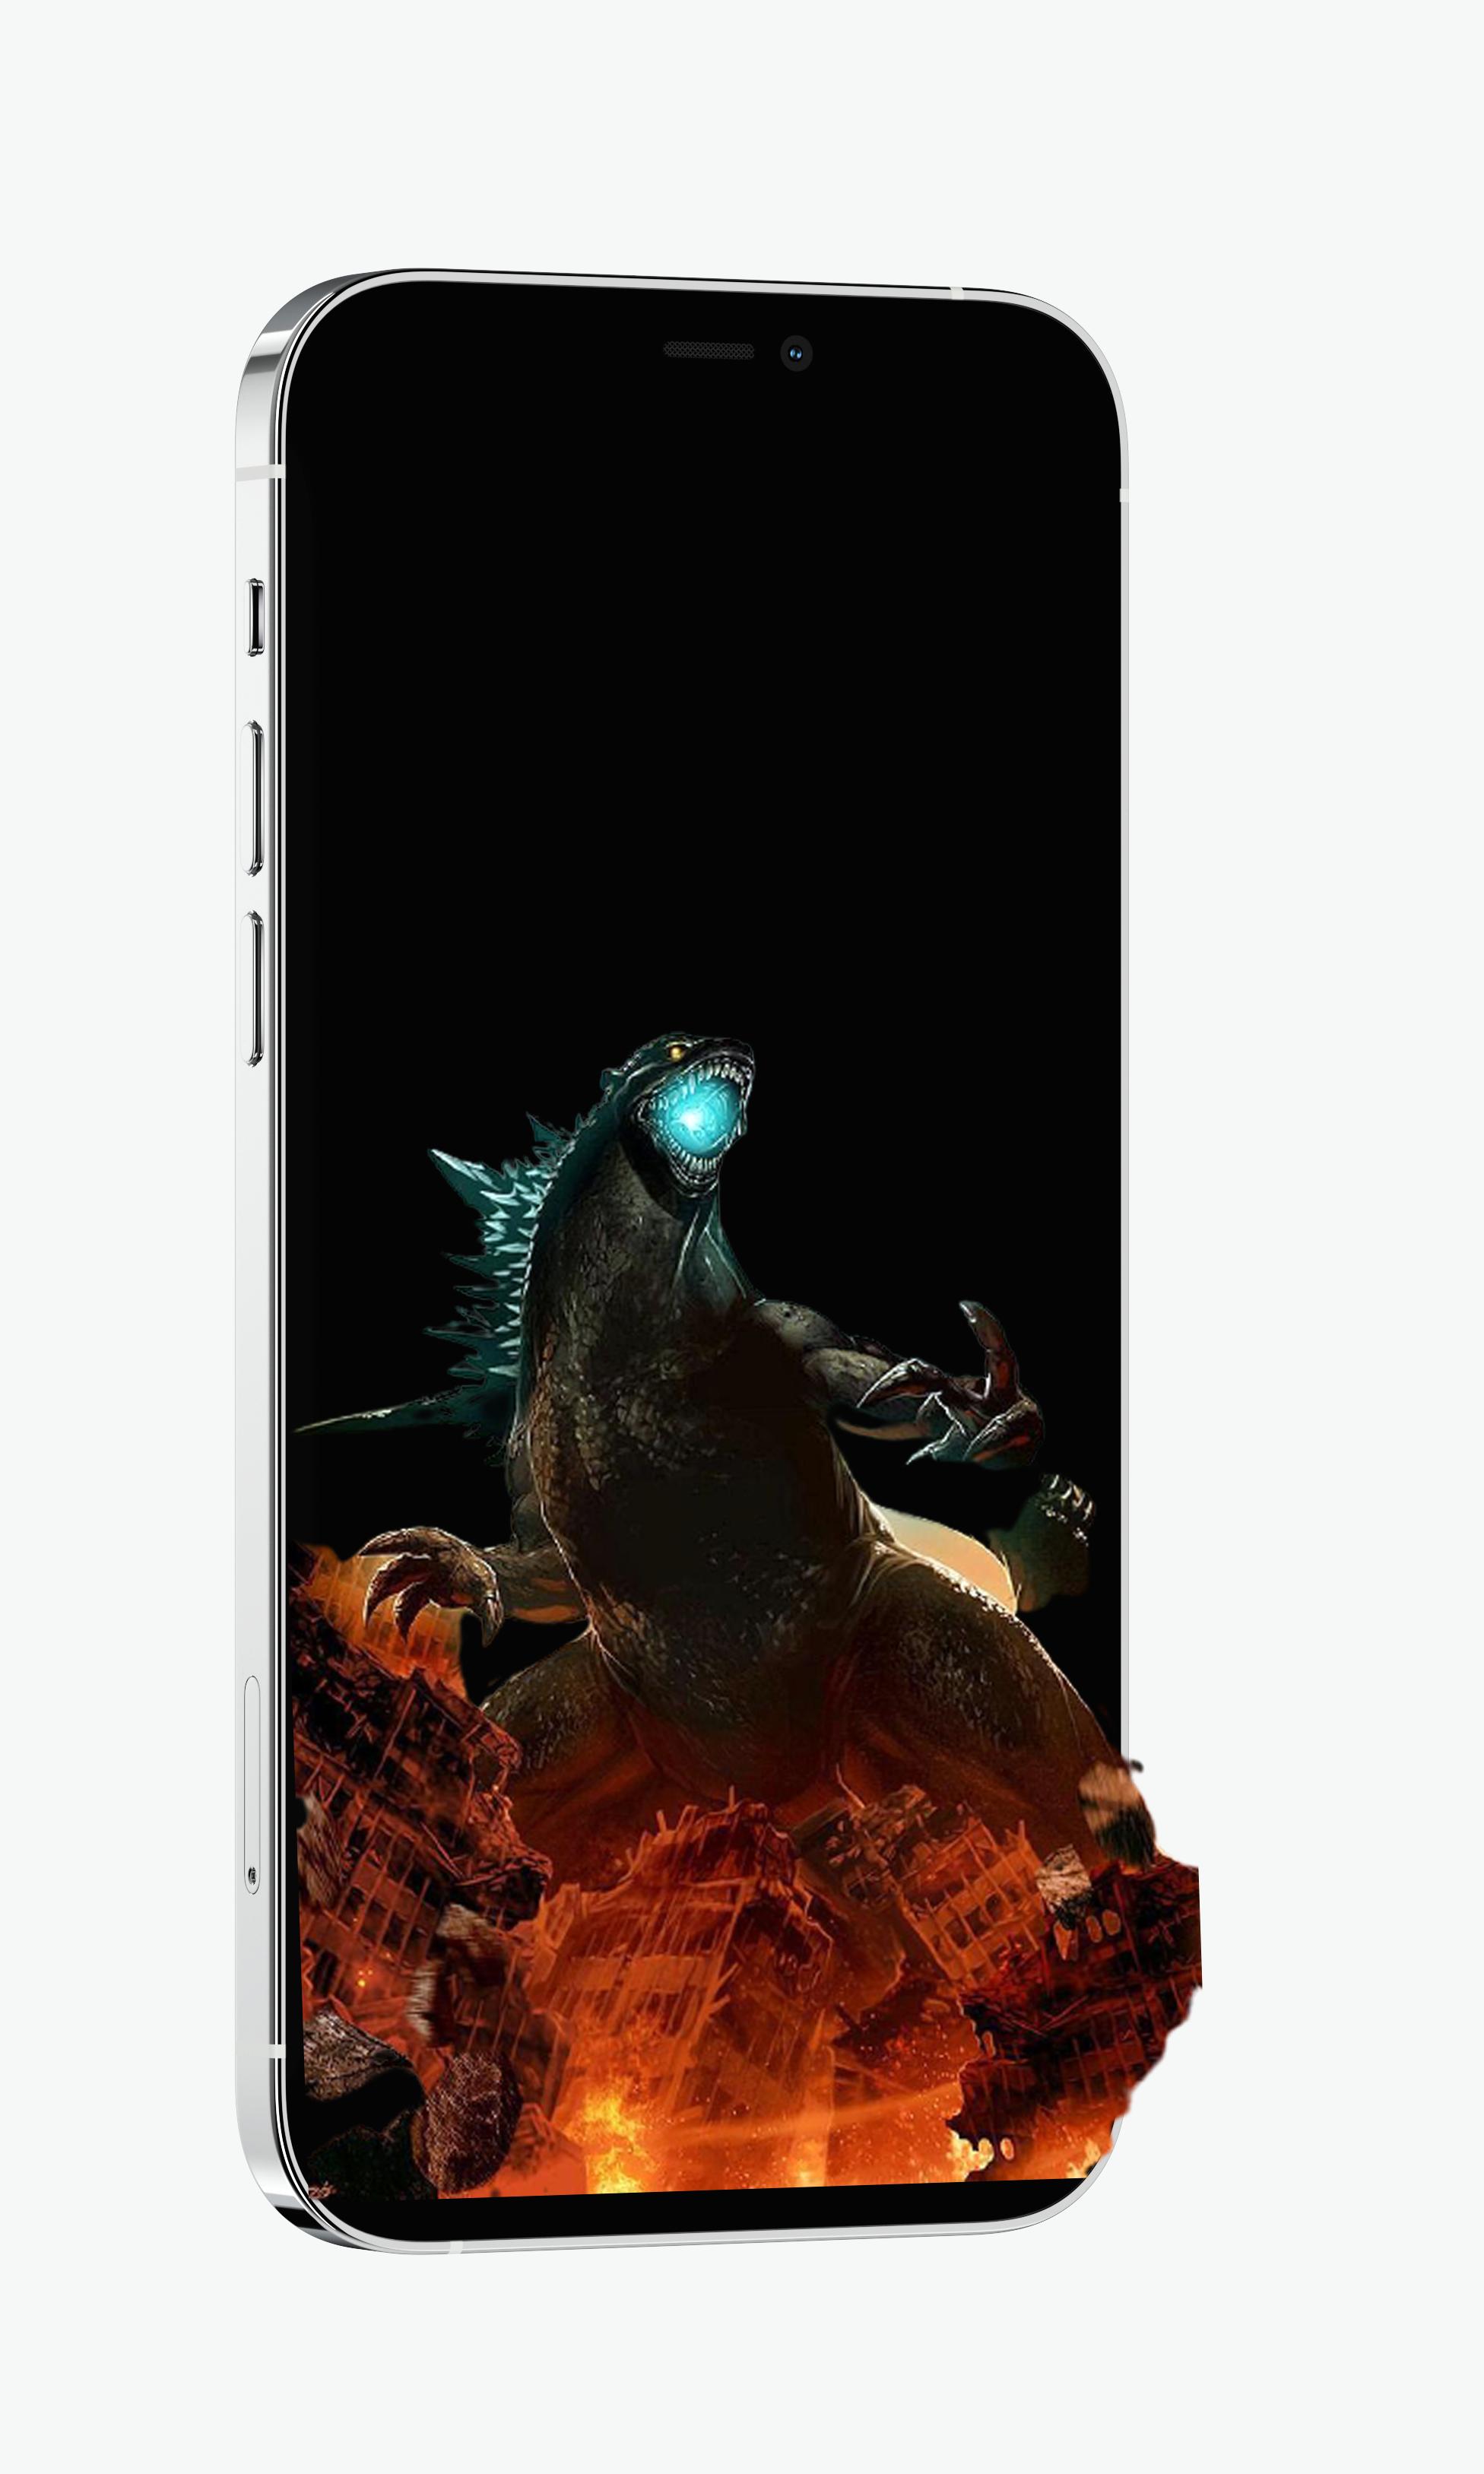 Godzilla Live Wallpaper Hd For Android Apk Download